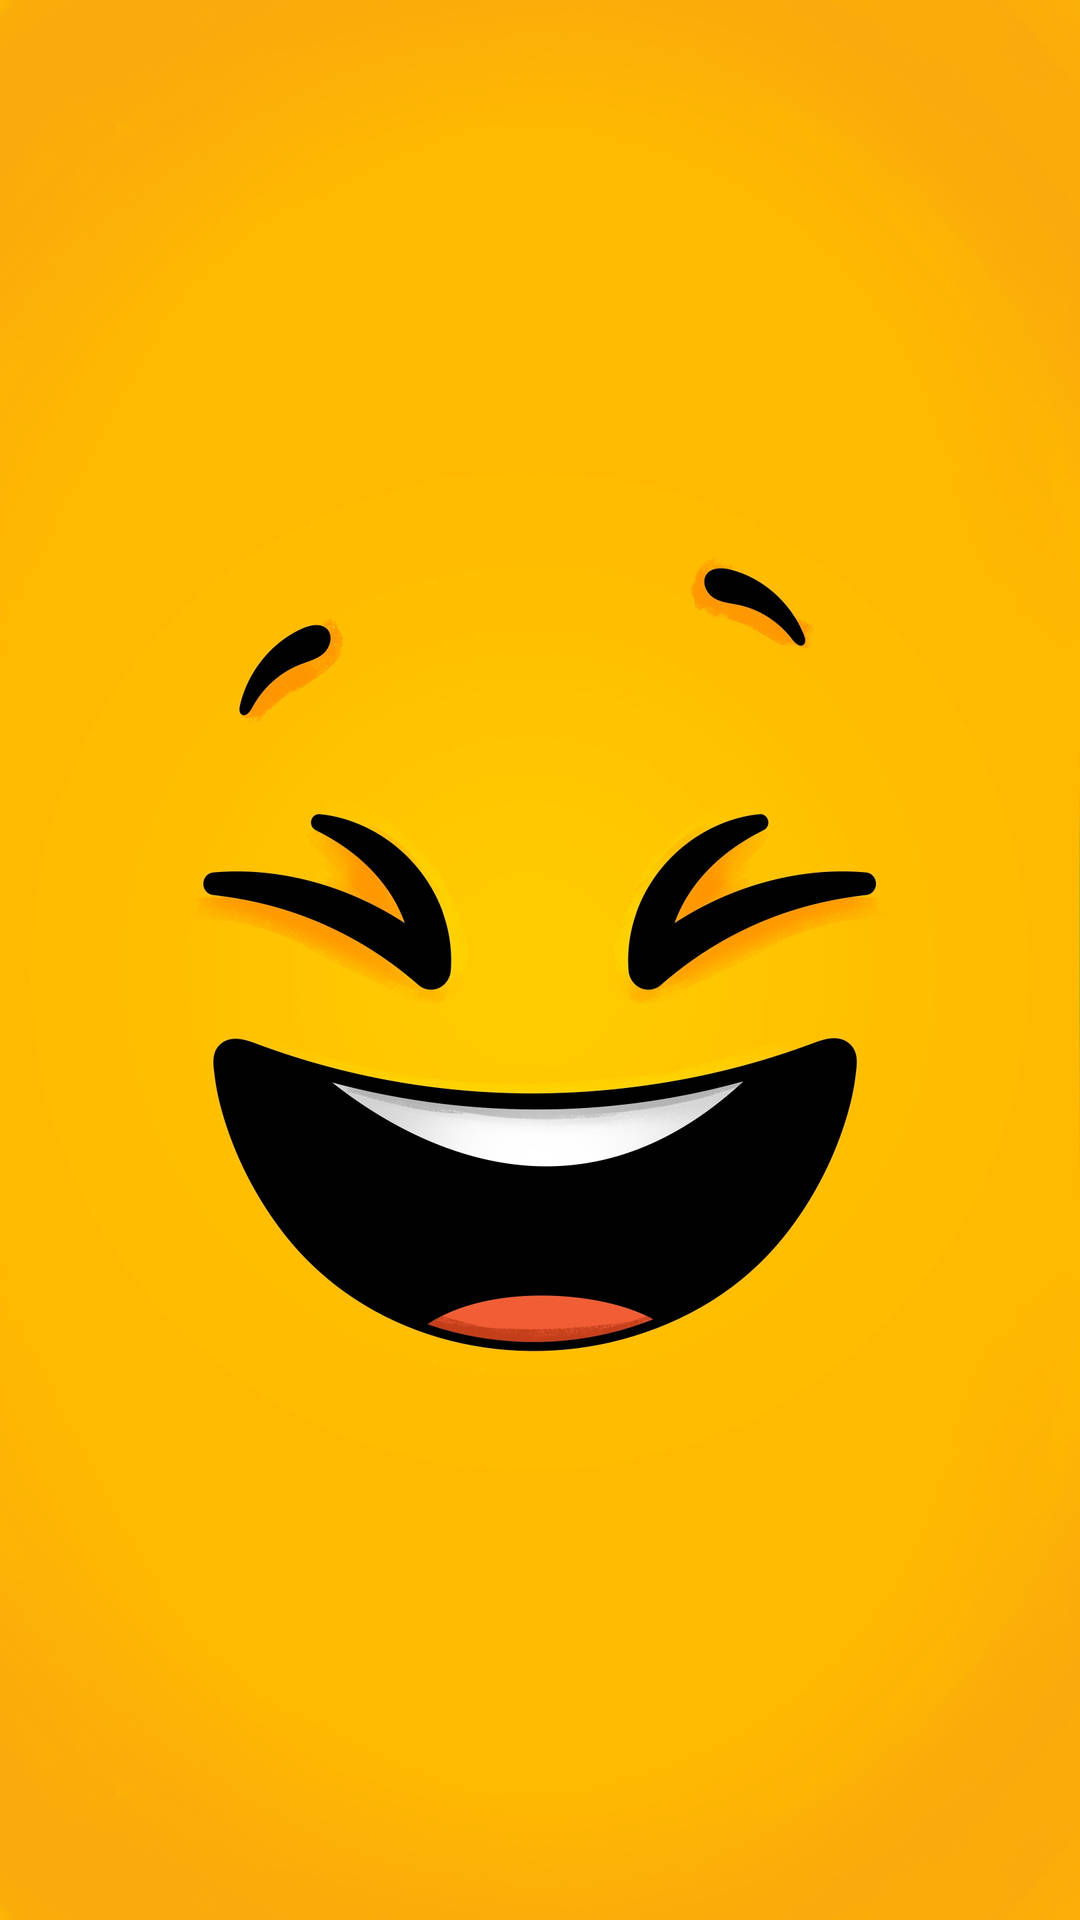 Laughing Smiley Plain Yellow Iphone Wallpaper